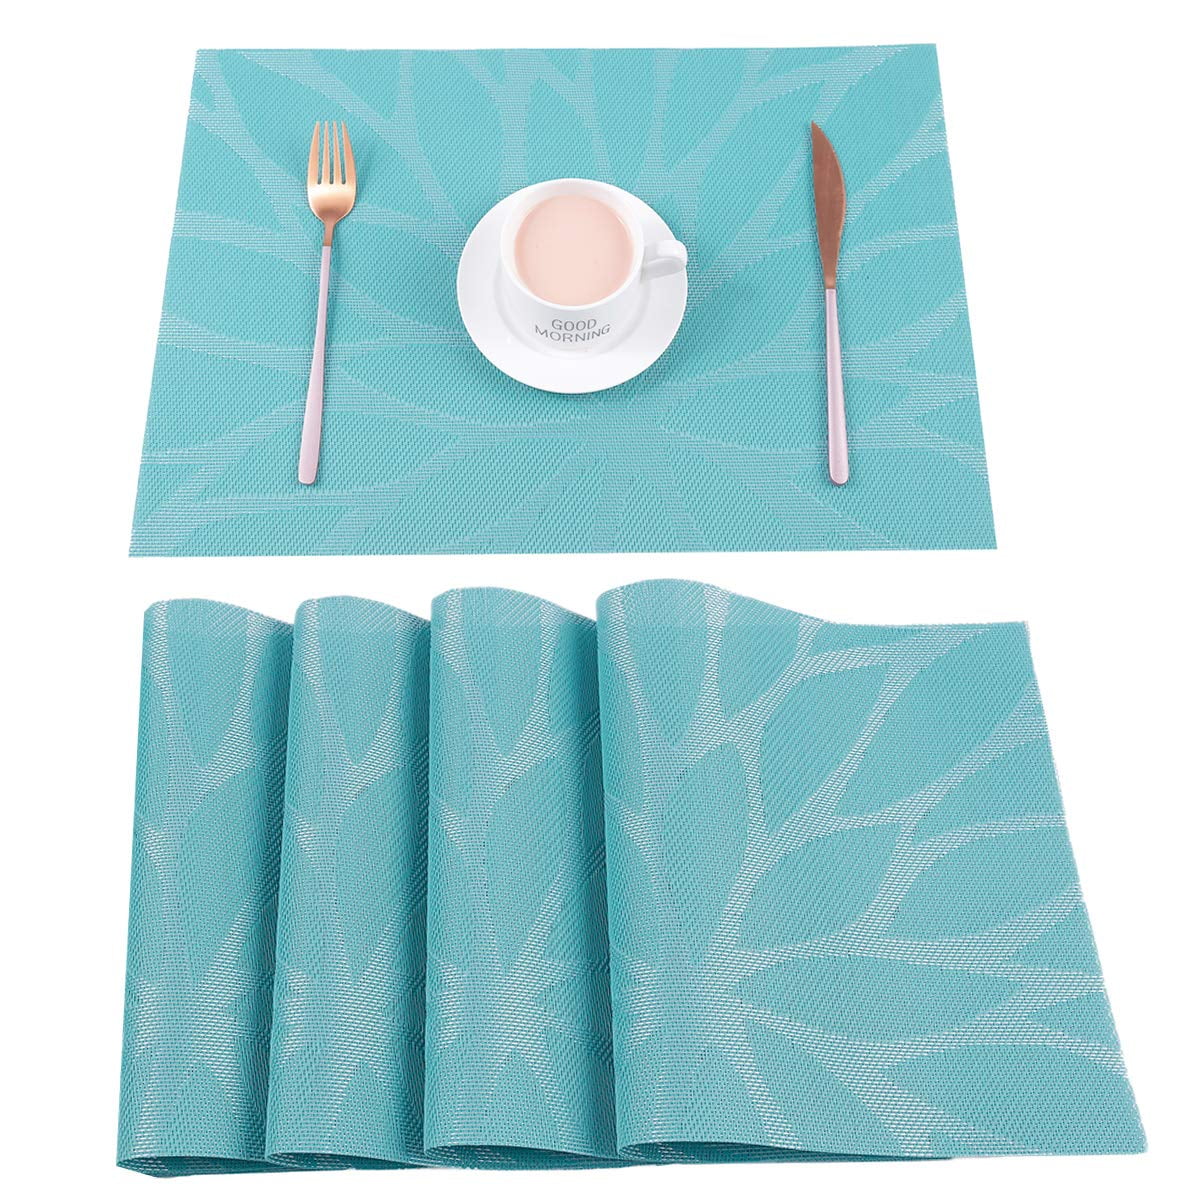 LivebyCare Set of 4 Decoration Washable Anti-Skid PVC Woven Dining Place Mats Dinner Heat-resistant Table Mats Durable Placemats 11.8X18.9 In Burgundy 